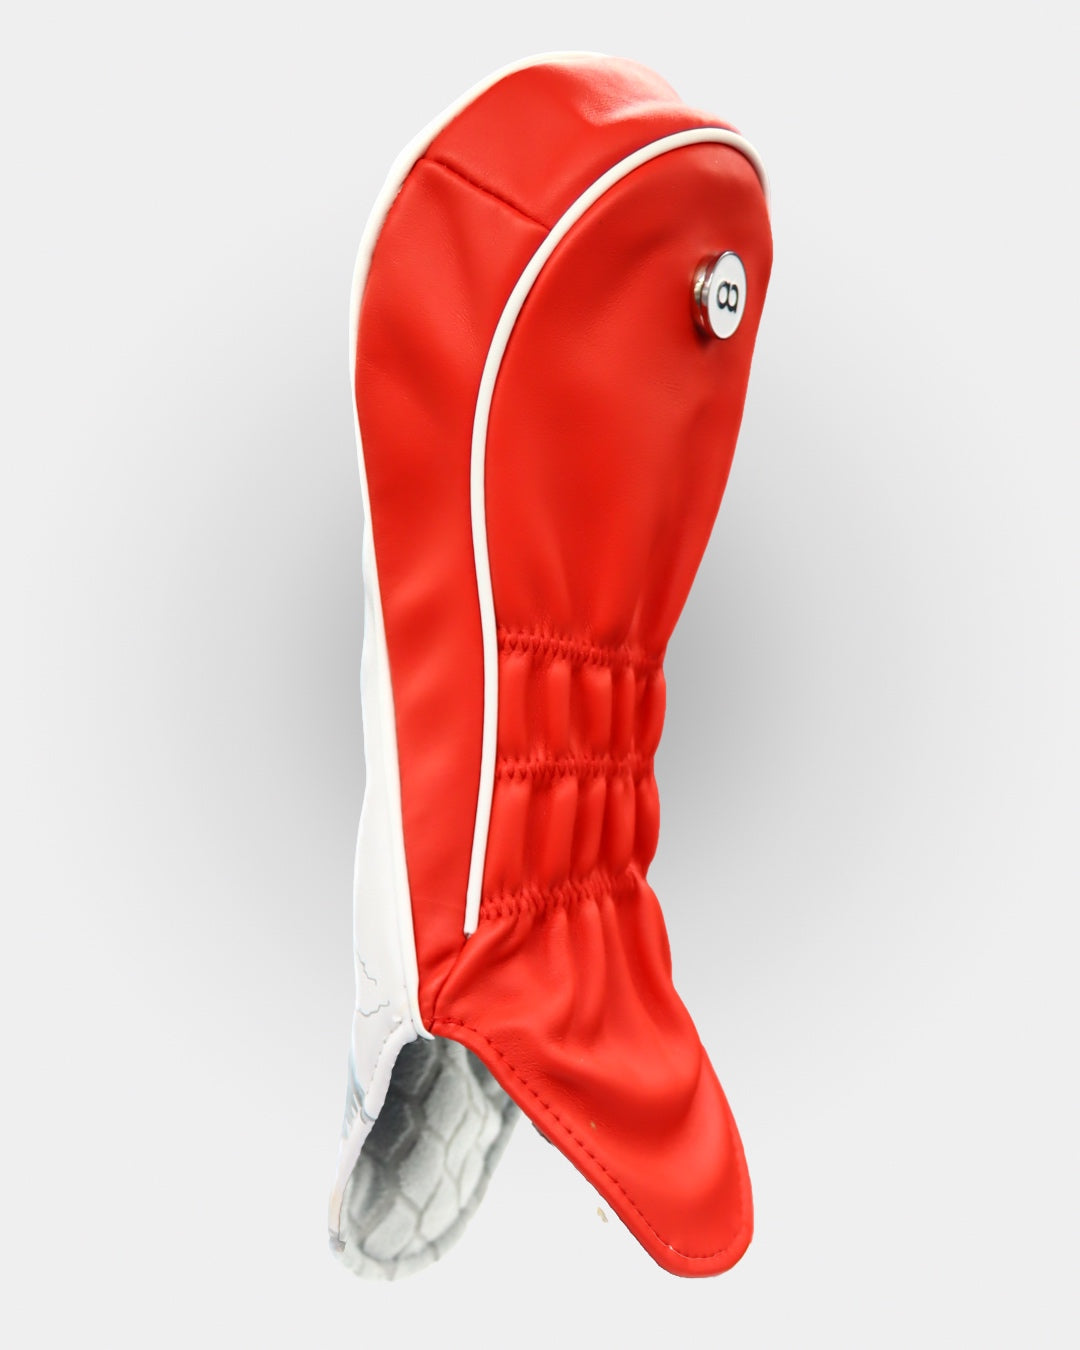 Japan white and red leather driver headcover by David Alexander. 